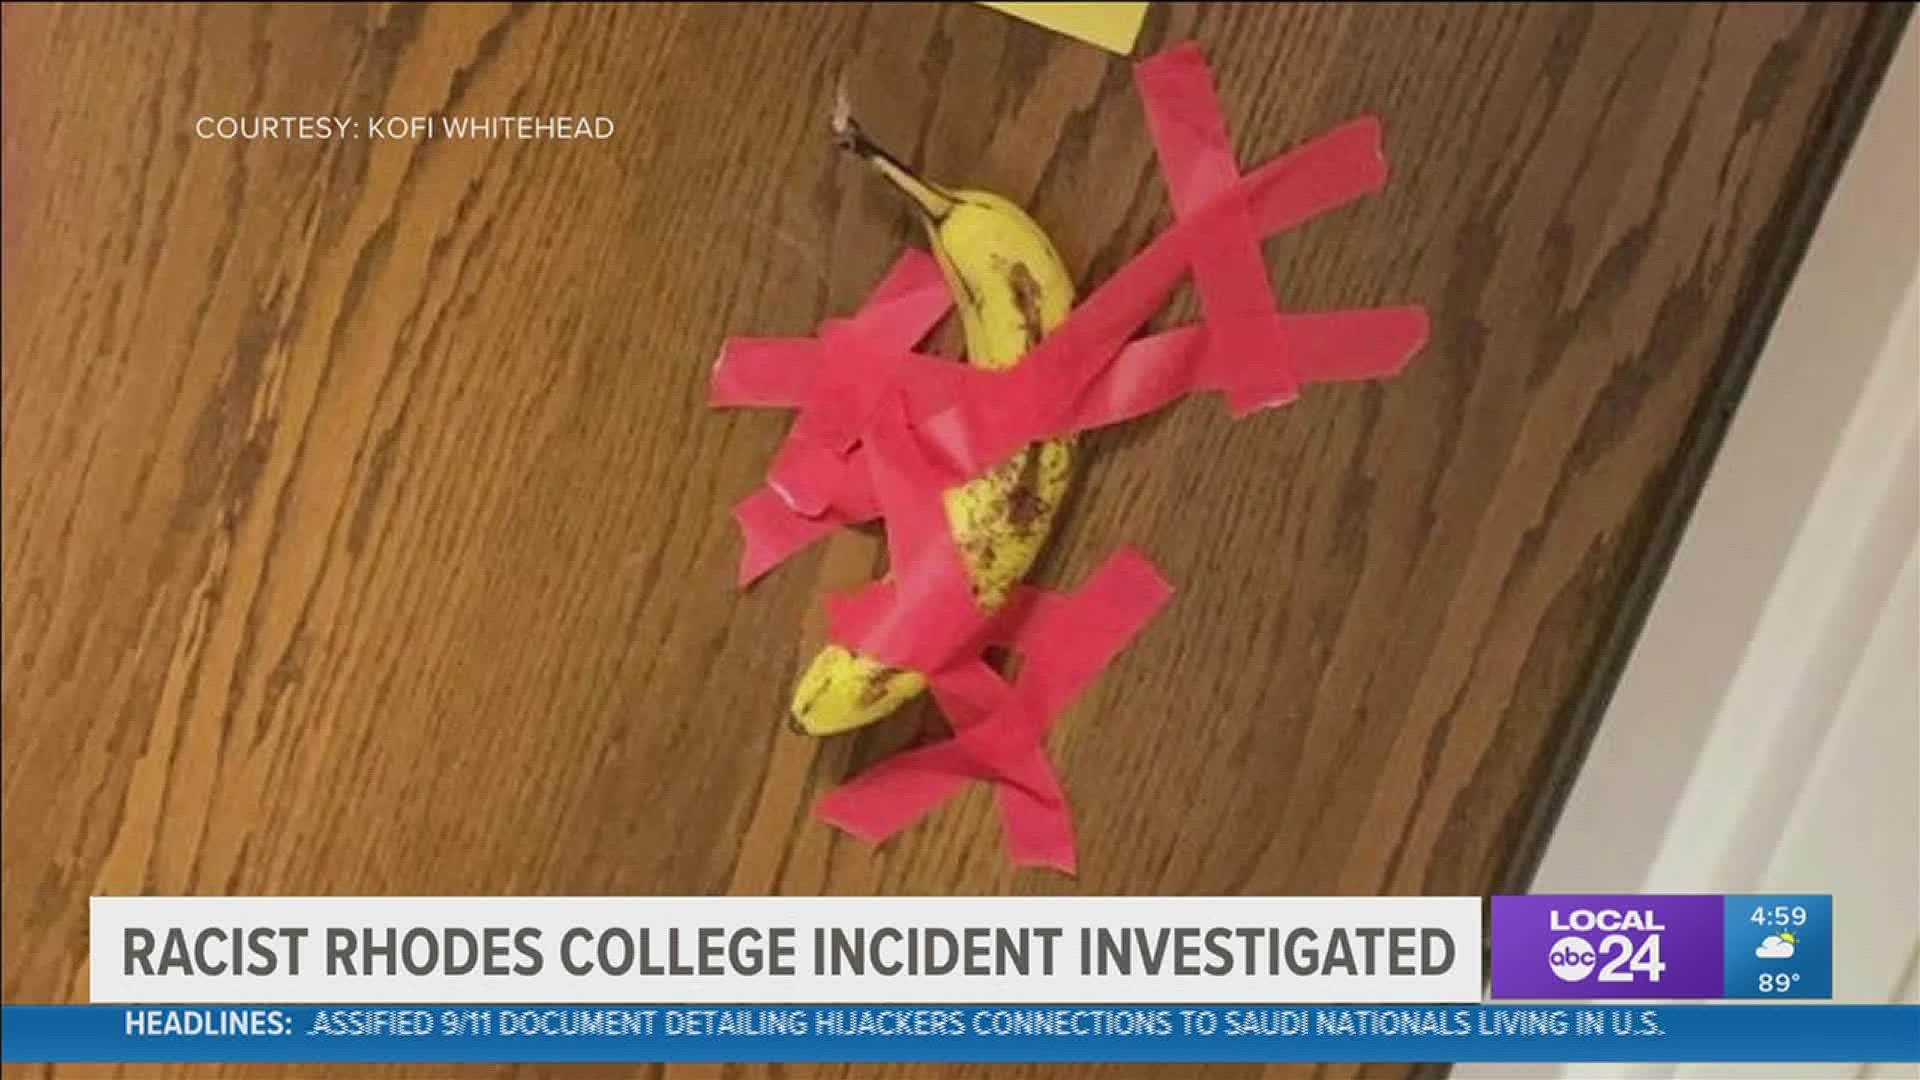 Students are concerned that school administrators are not taking the incident seriously.